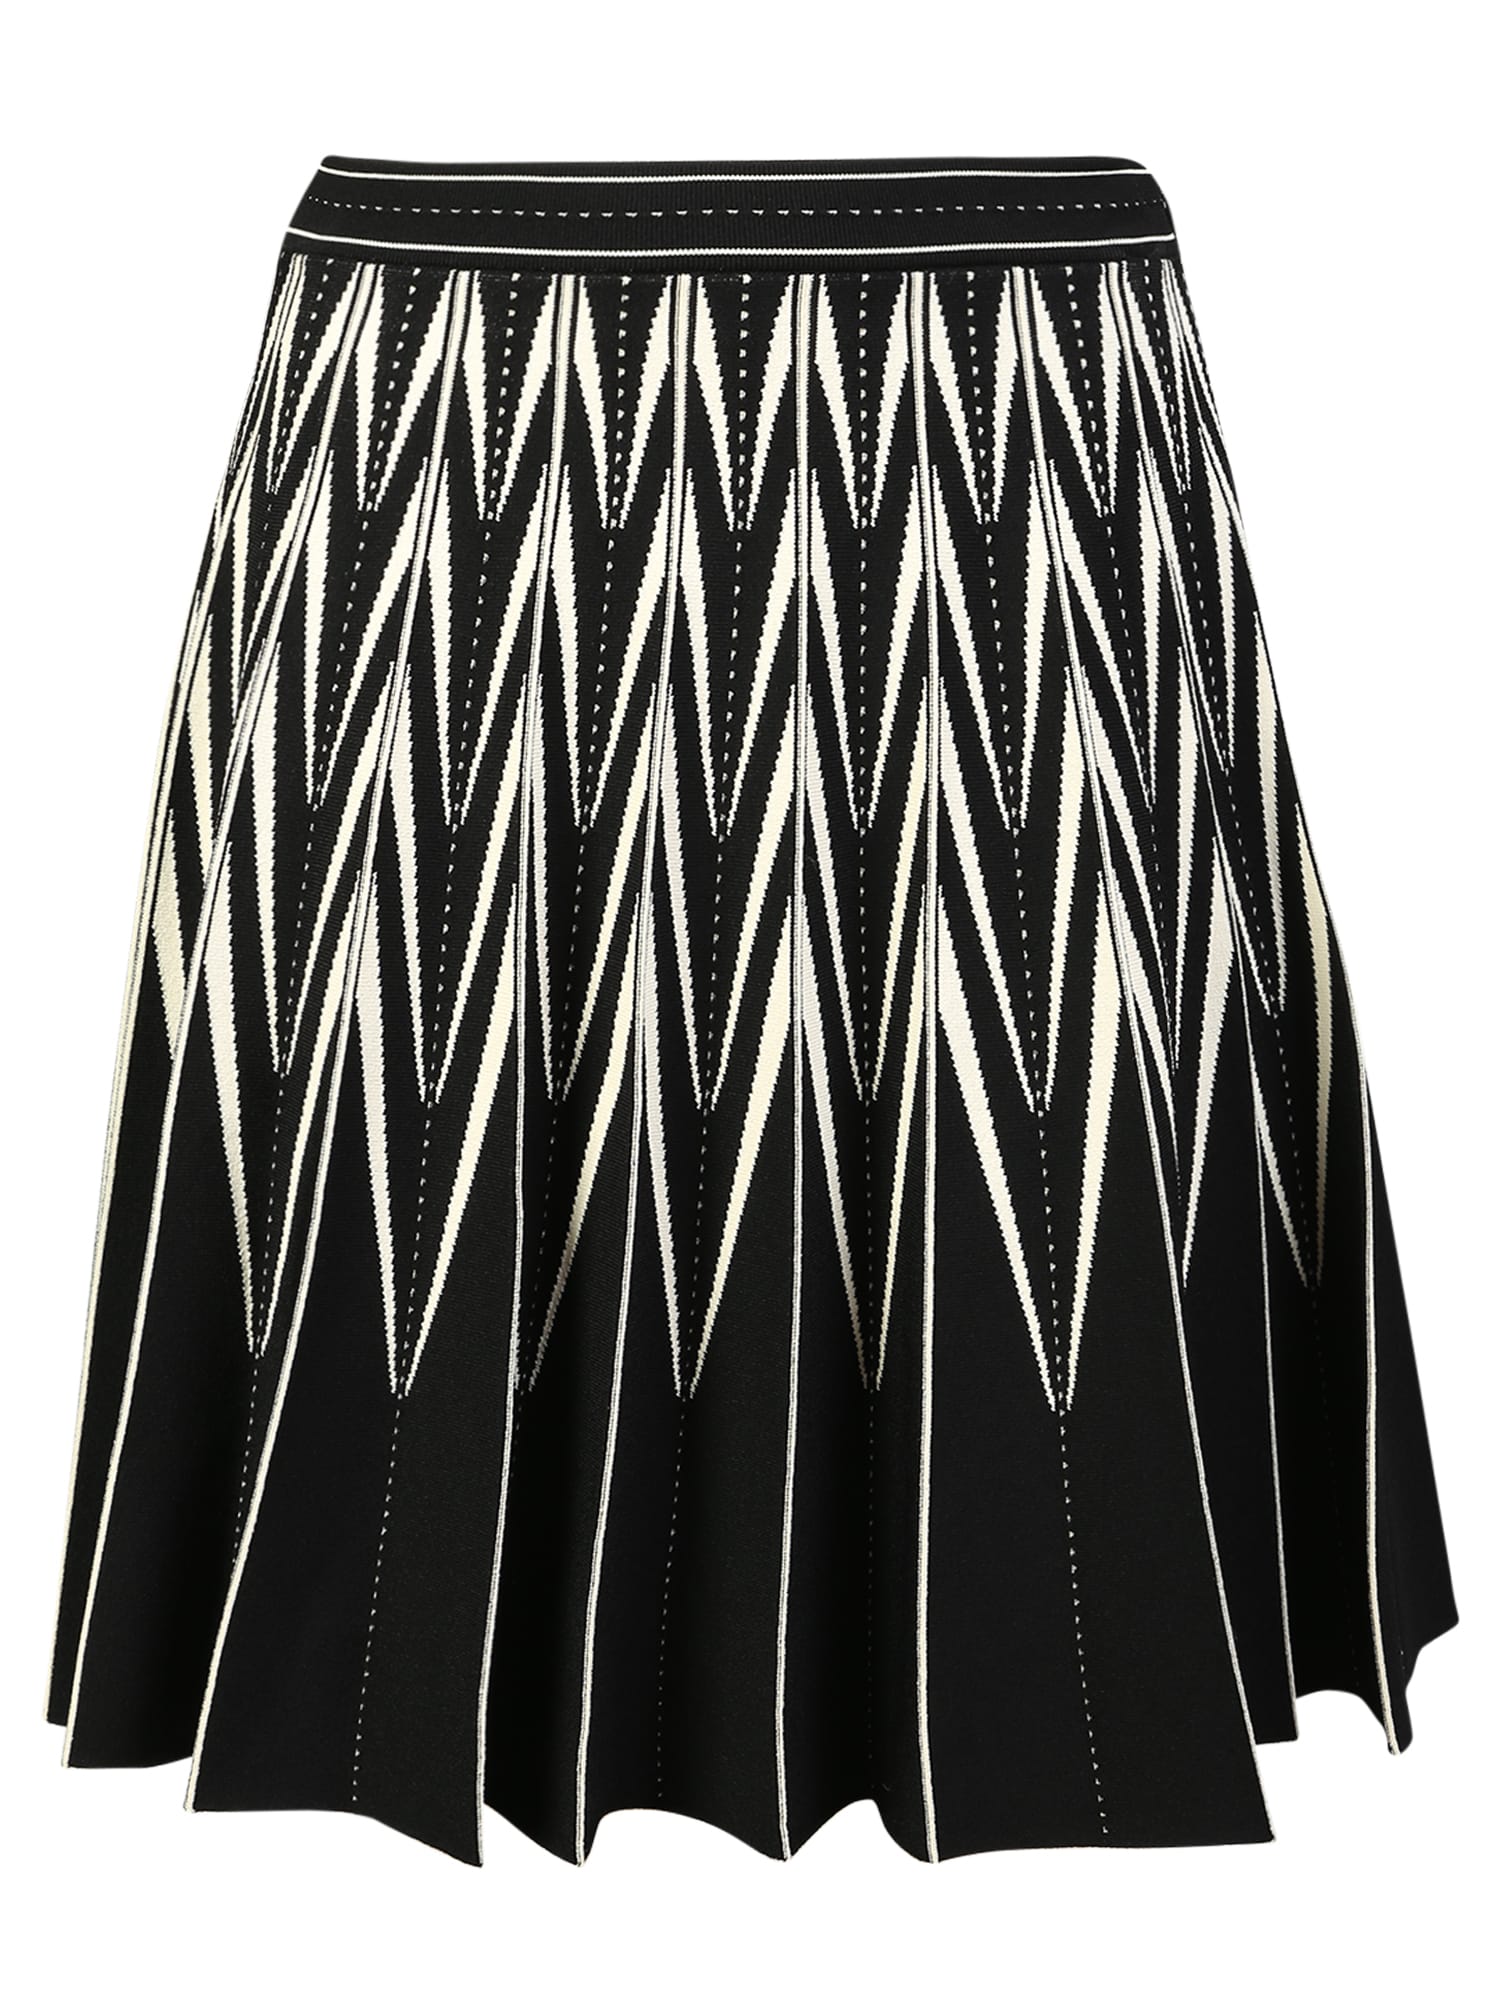 Alexander Mcqueen Monochromatic Knit Mini Skirt. Ideal To Give A Touch Of Class And Versatility